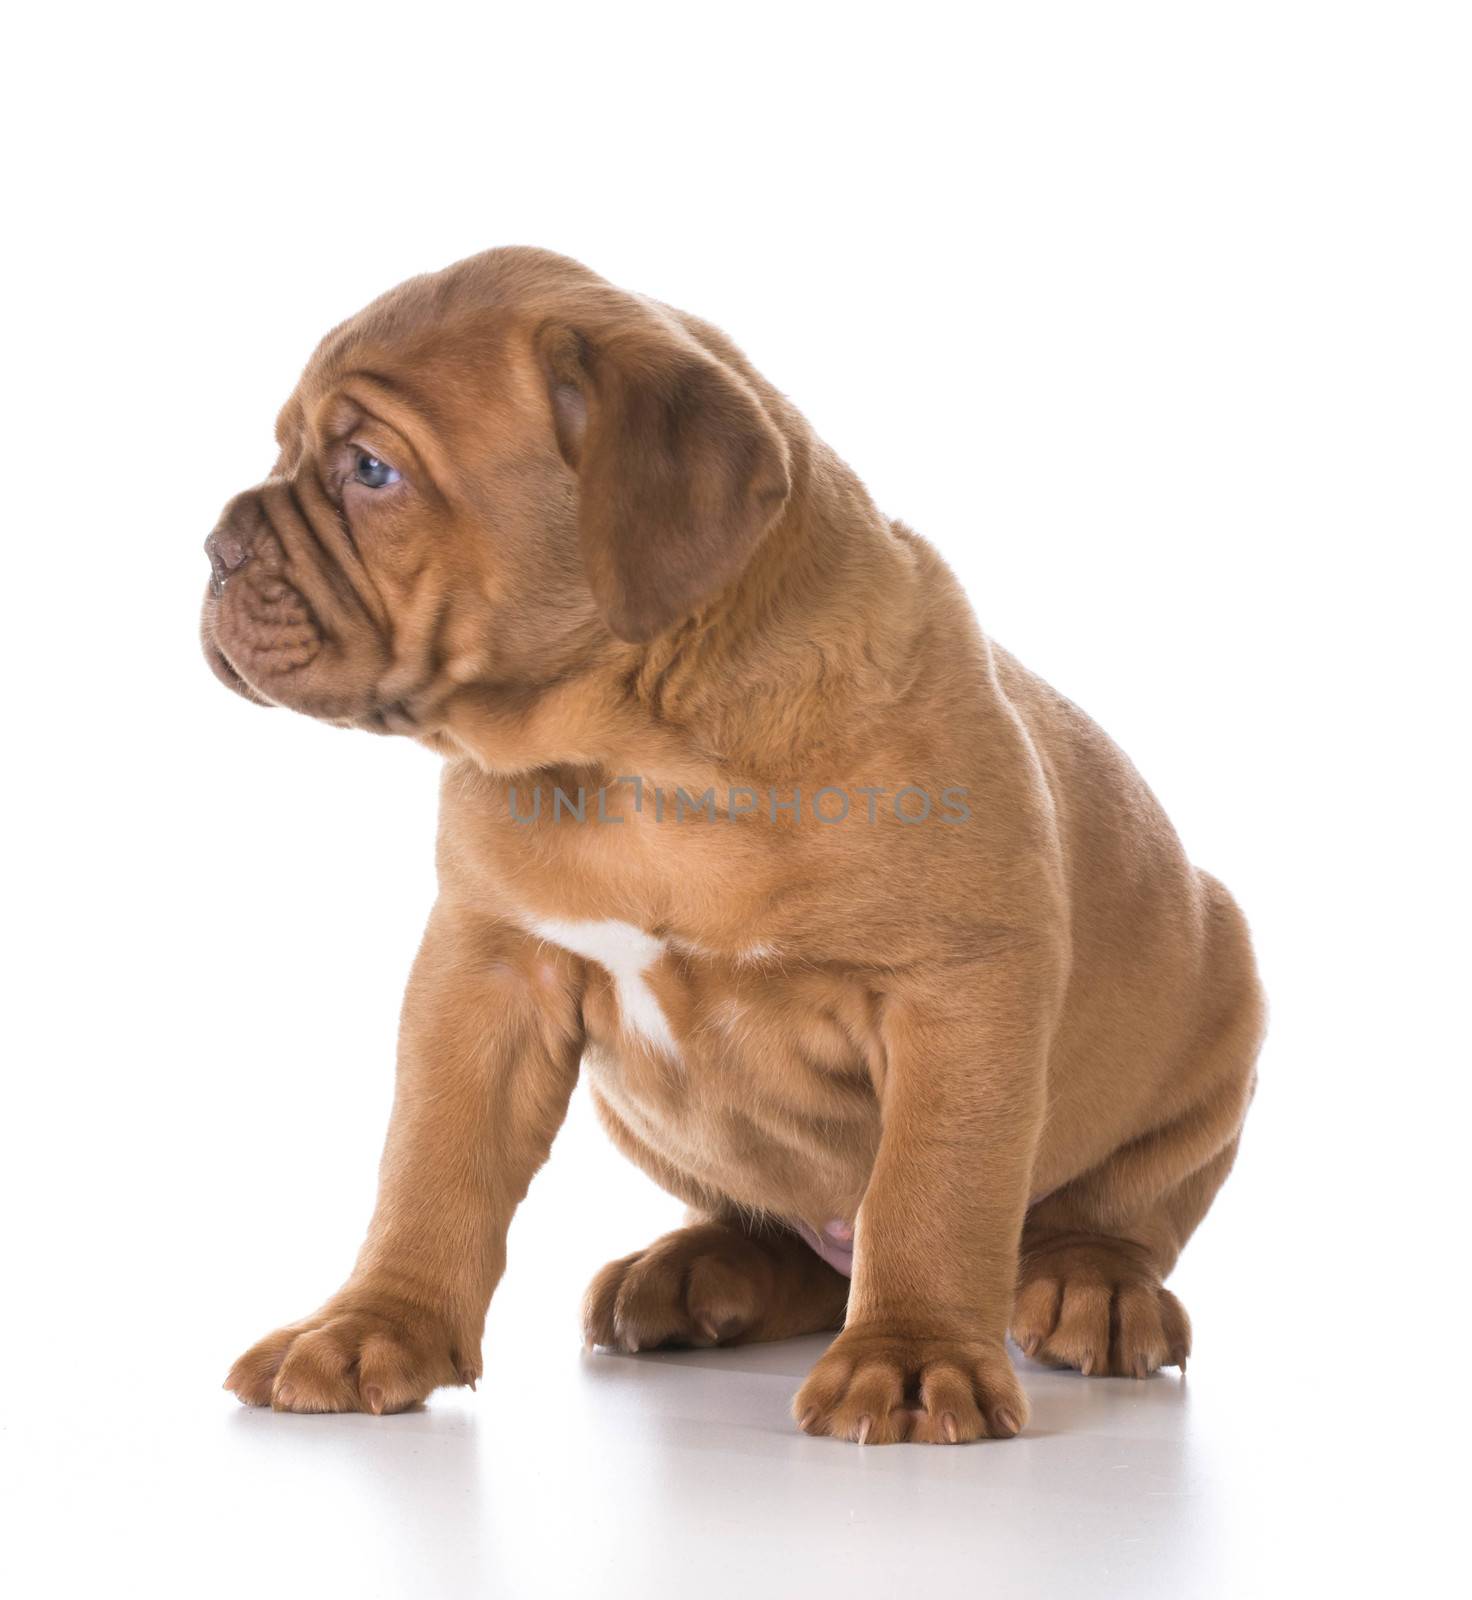 cute puppy - dogue de bordeaux puppy sitting on white background - 5 weeks old